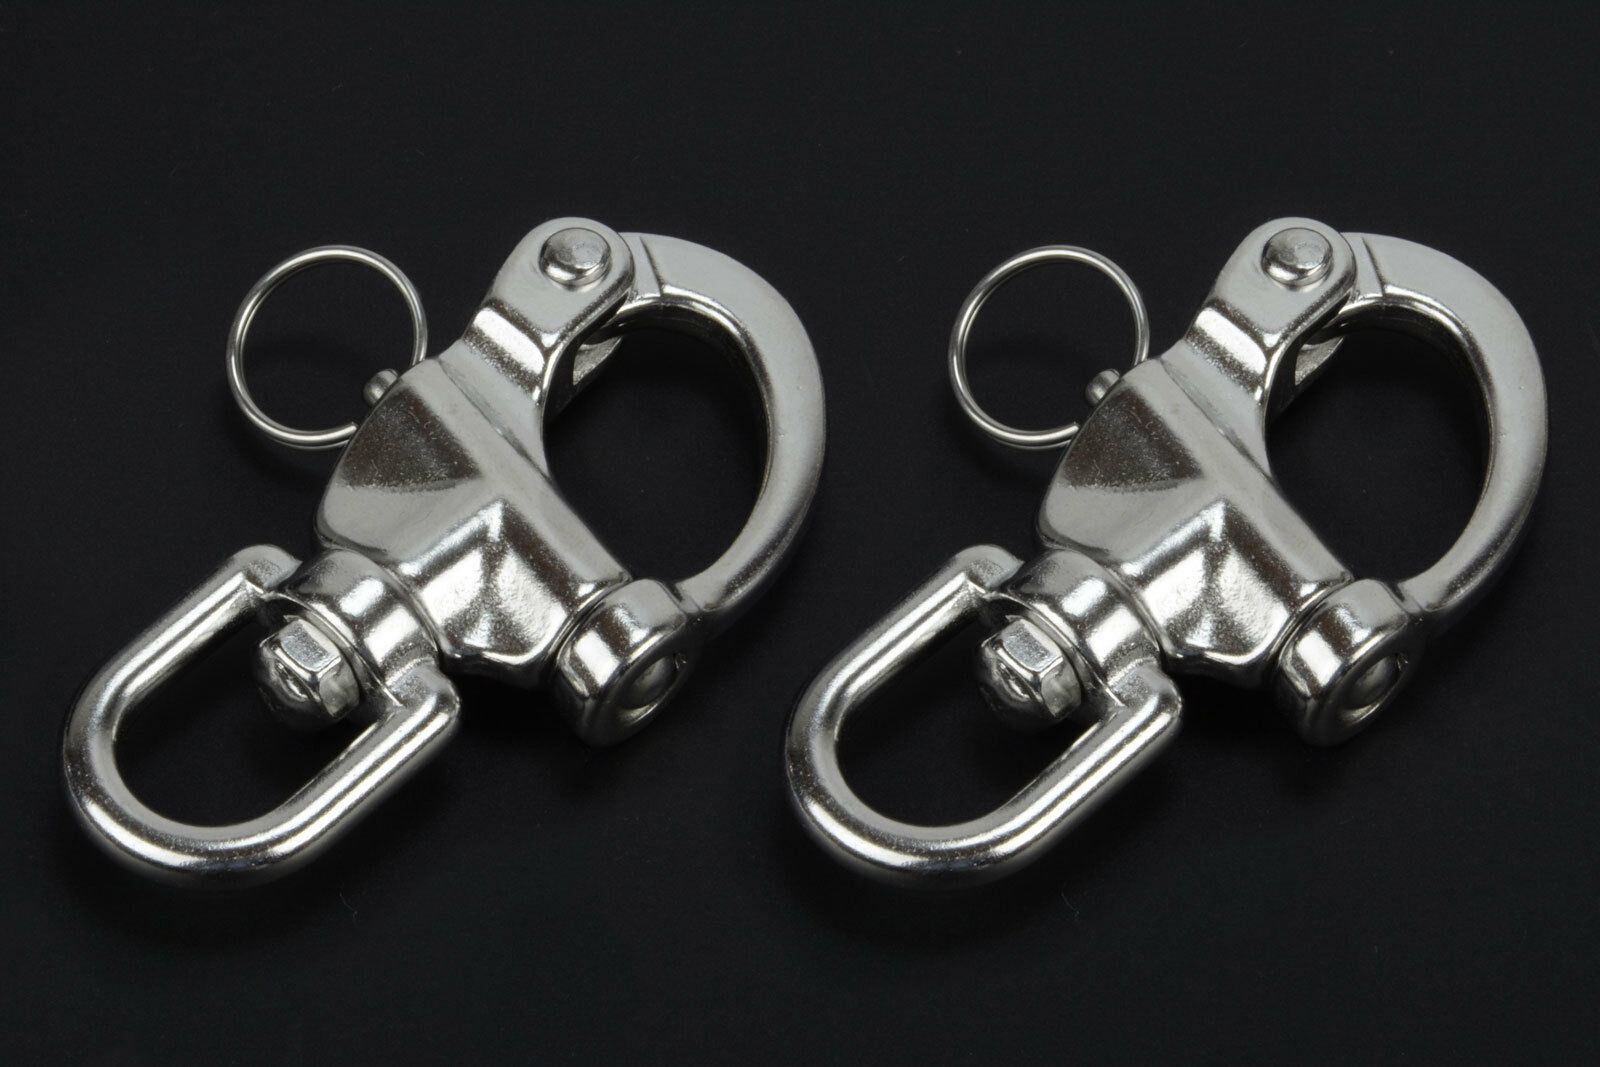 3-1/2" Eye Swivel Snap Shackle 316 Stainless Steel For Sailboat Halyard 2pcs